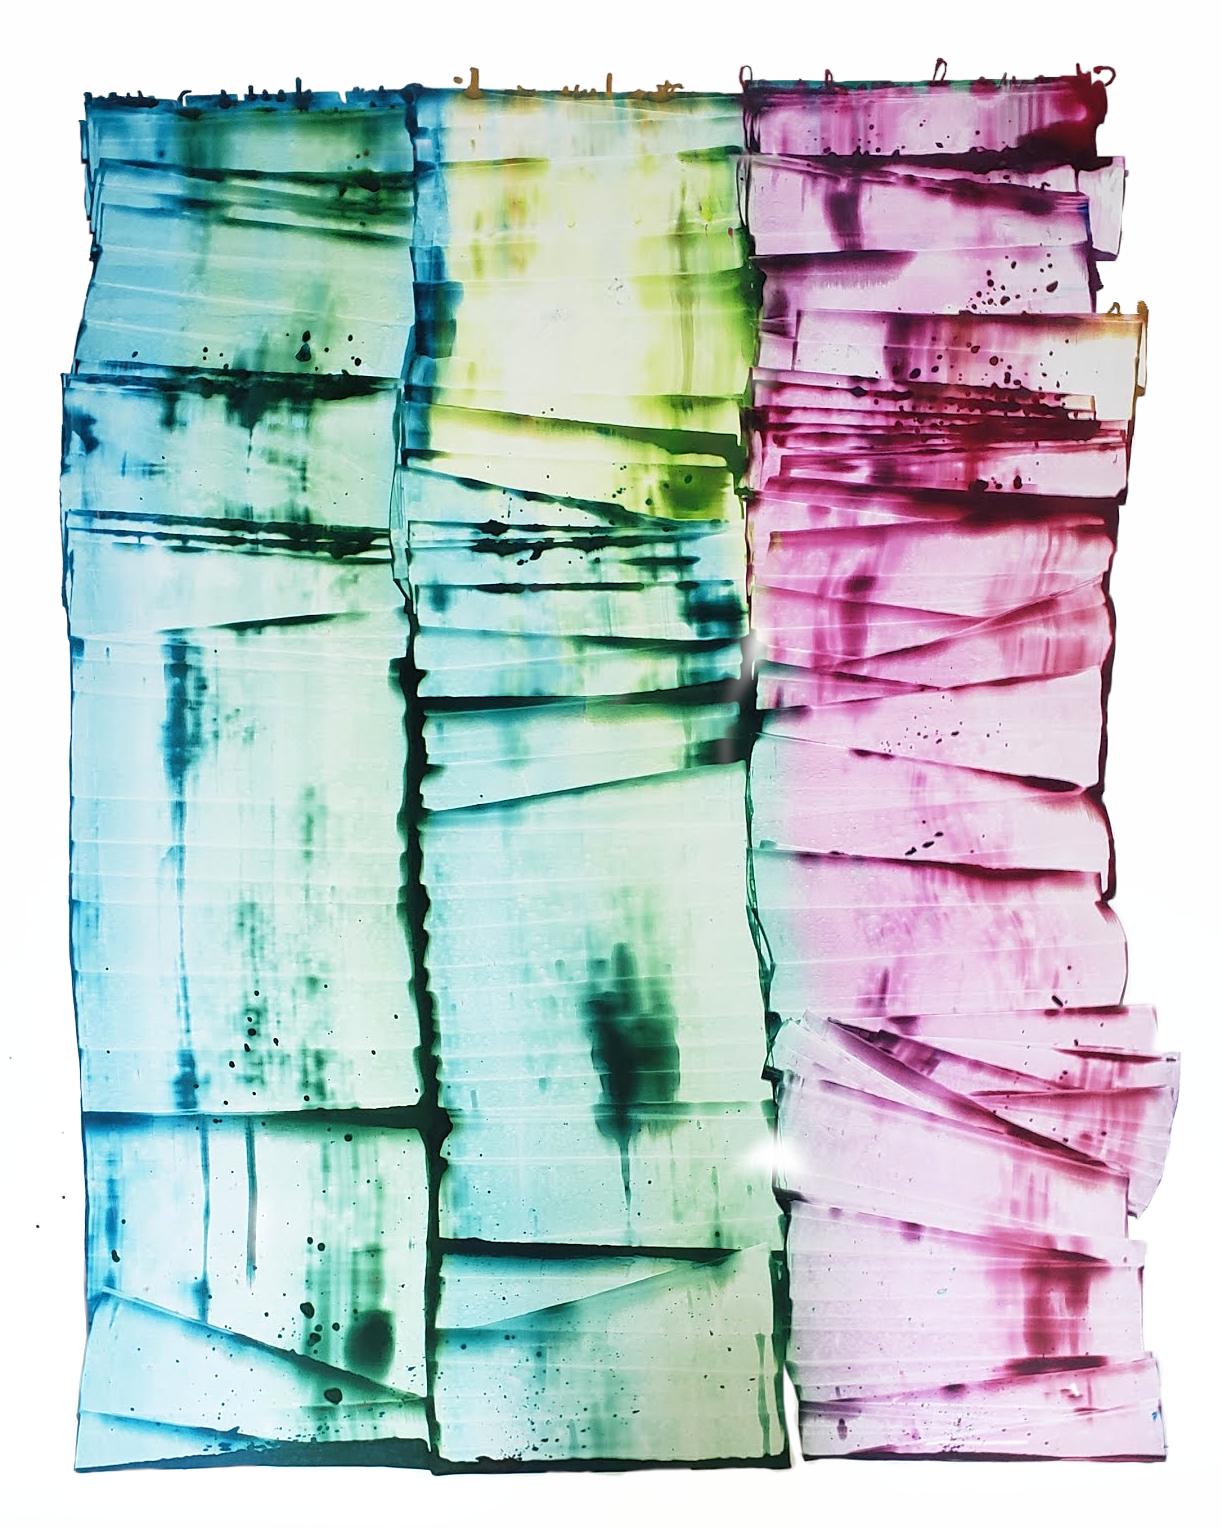 Sarah Irvin "Tell Us Something" - Abstract ink painting on Yupo paper 